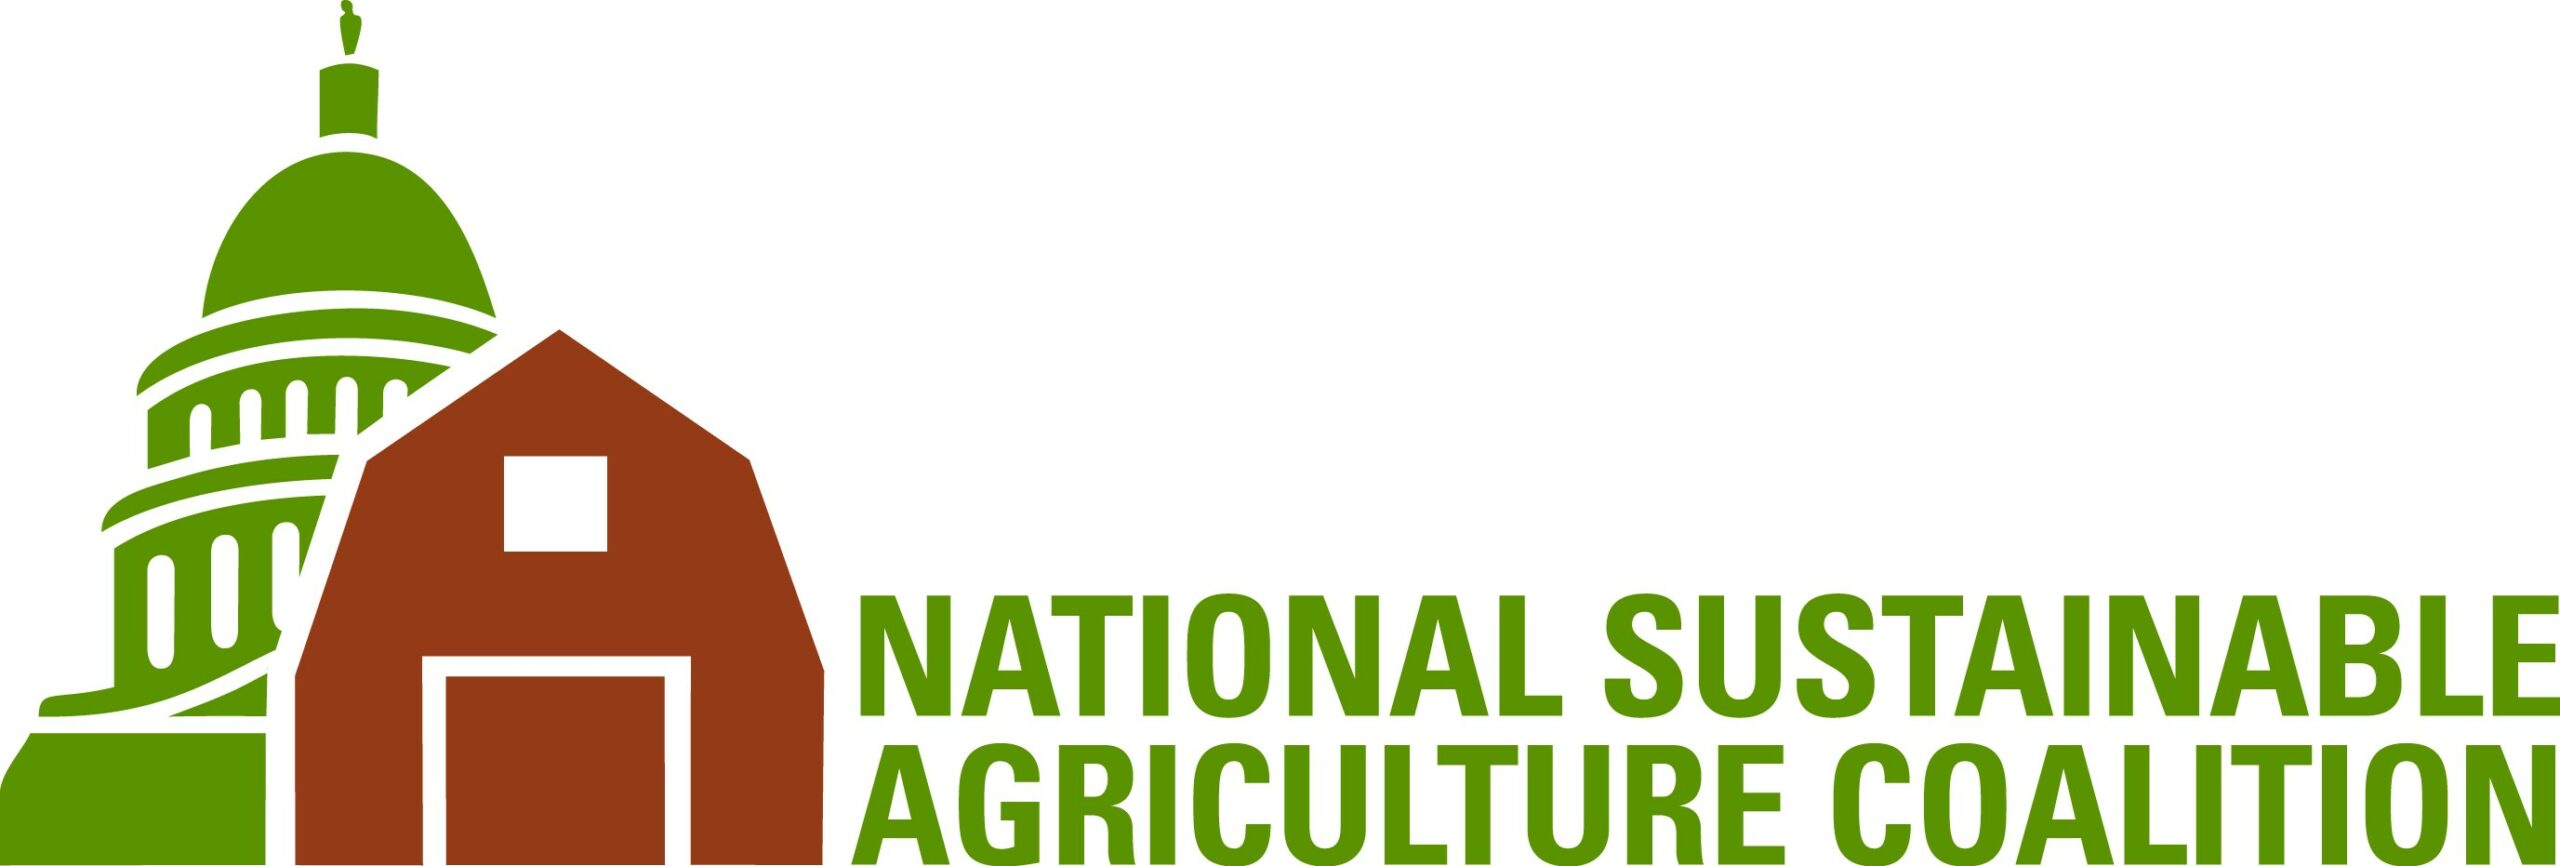 PASA Event Sponsorship from https://sustainableagriculture.net/